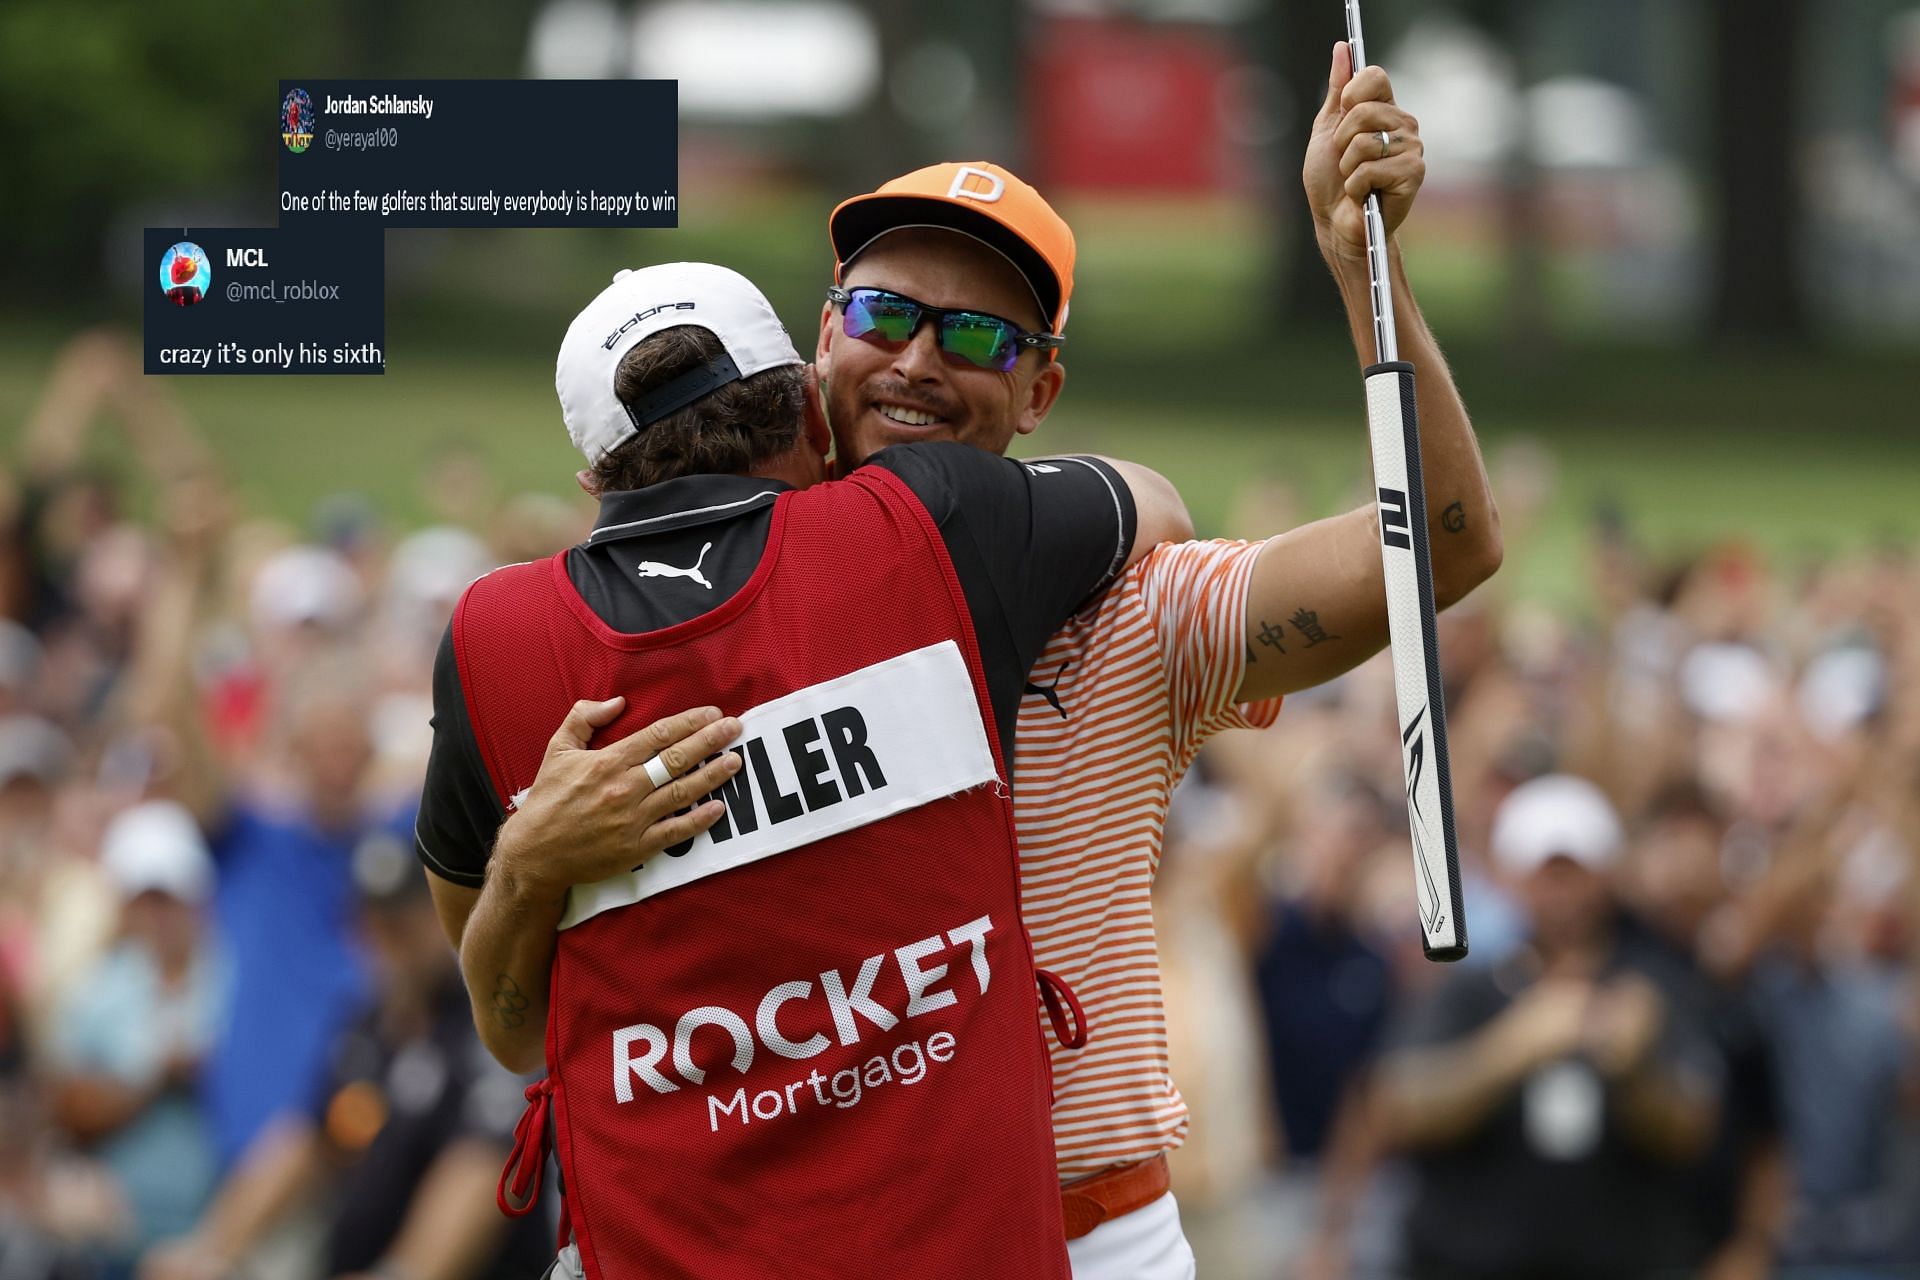 Rickie Fowler and his caddie, Ricky Romano, celebrate on the 18th green after winning the playoff hole at the Rocket Mortgage Classic